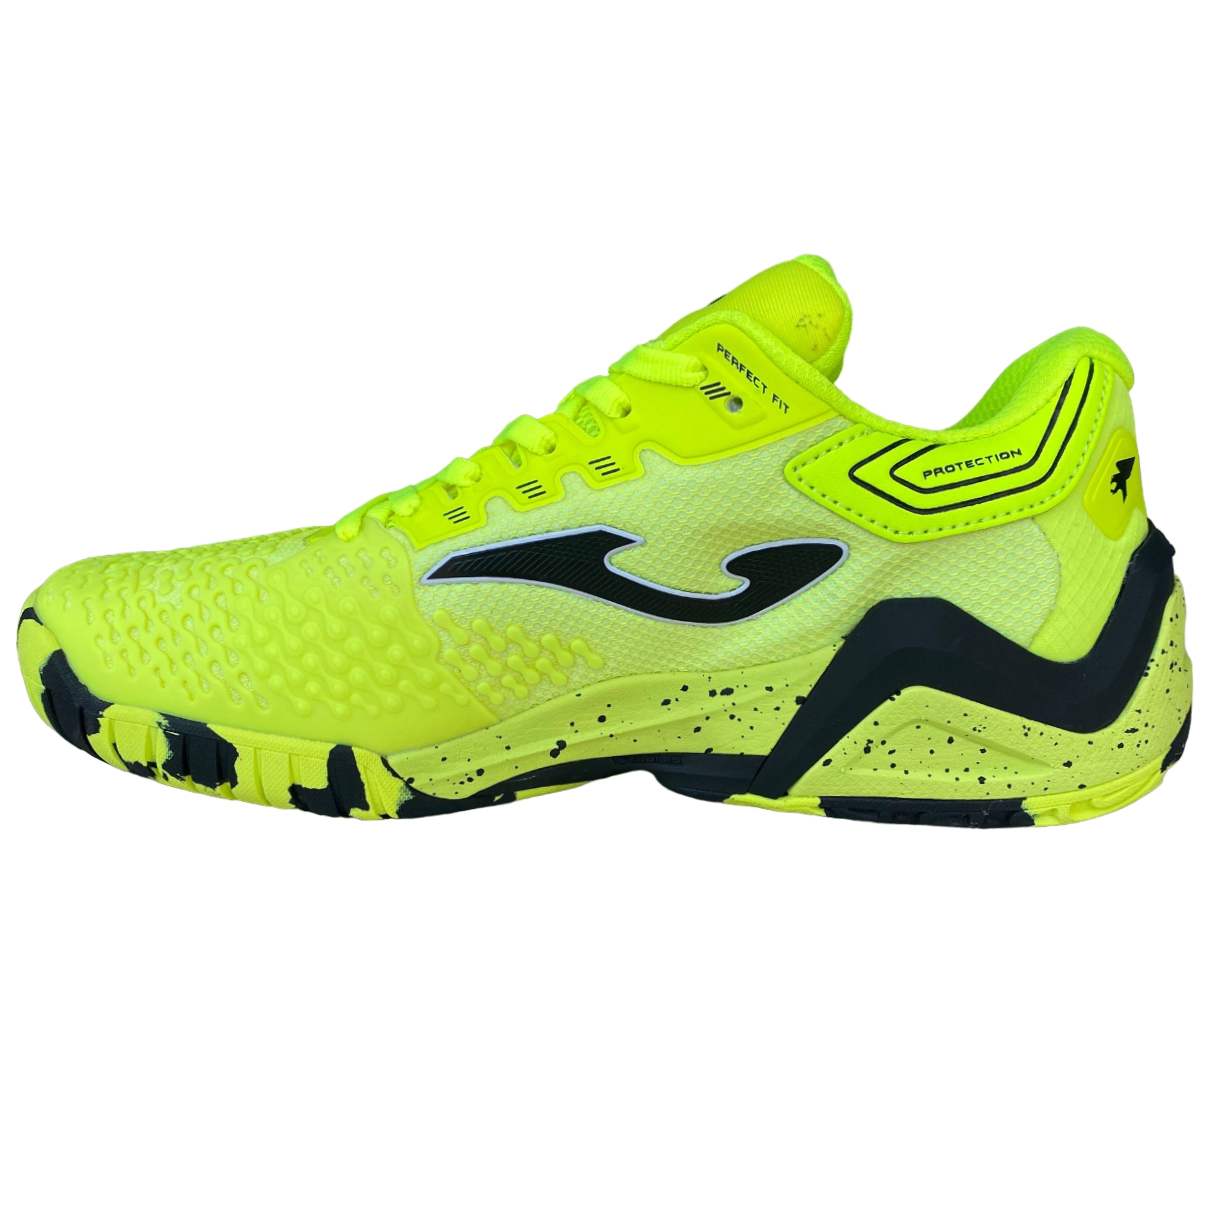 Joma cushioned and protective men&#39;s tennis shoe Ace Men 2309 lemon yellow